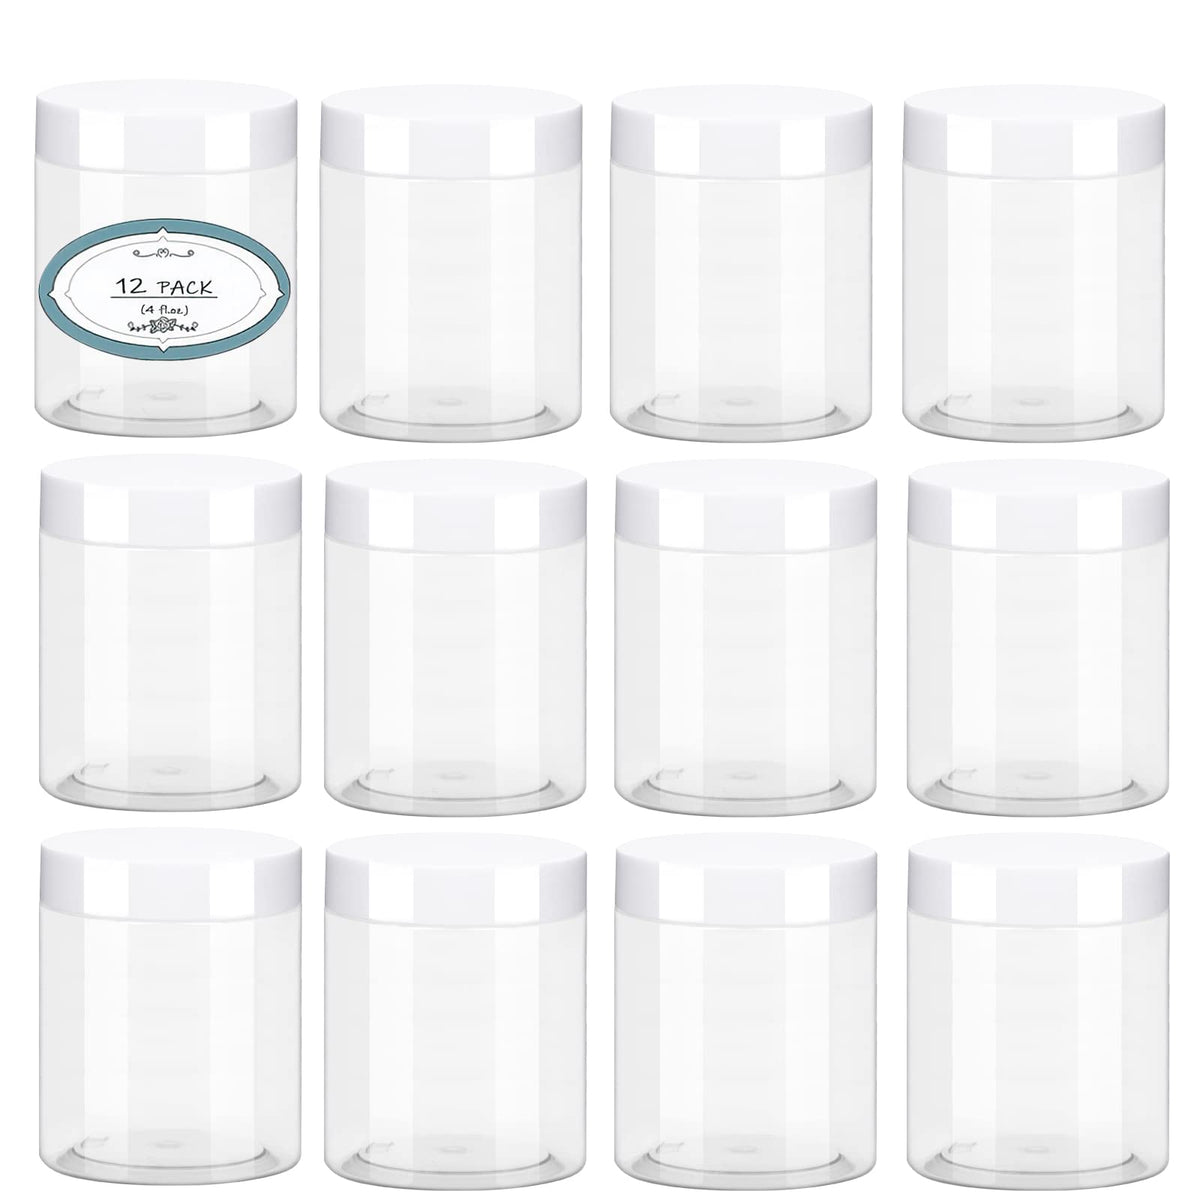 Healthy Packers Slime Containers with Water-tight Lids (8 oz, 12 Pack) -  Clear Plastic Food Storage Jars with Individual Labels- Great for